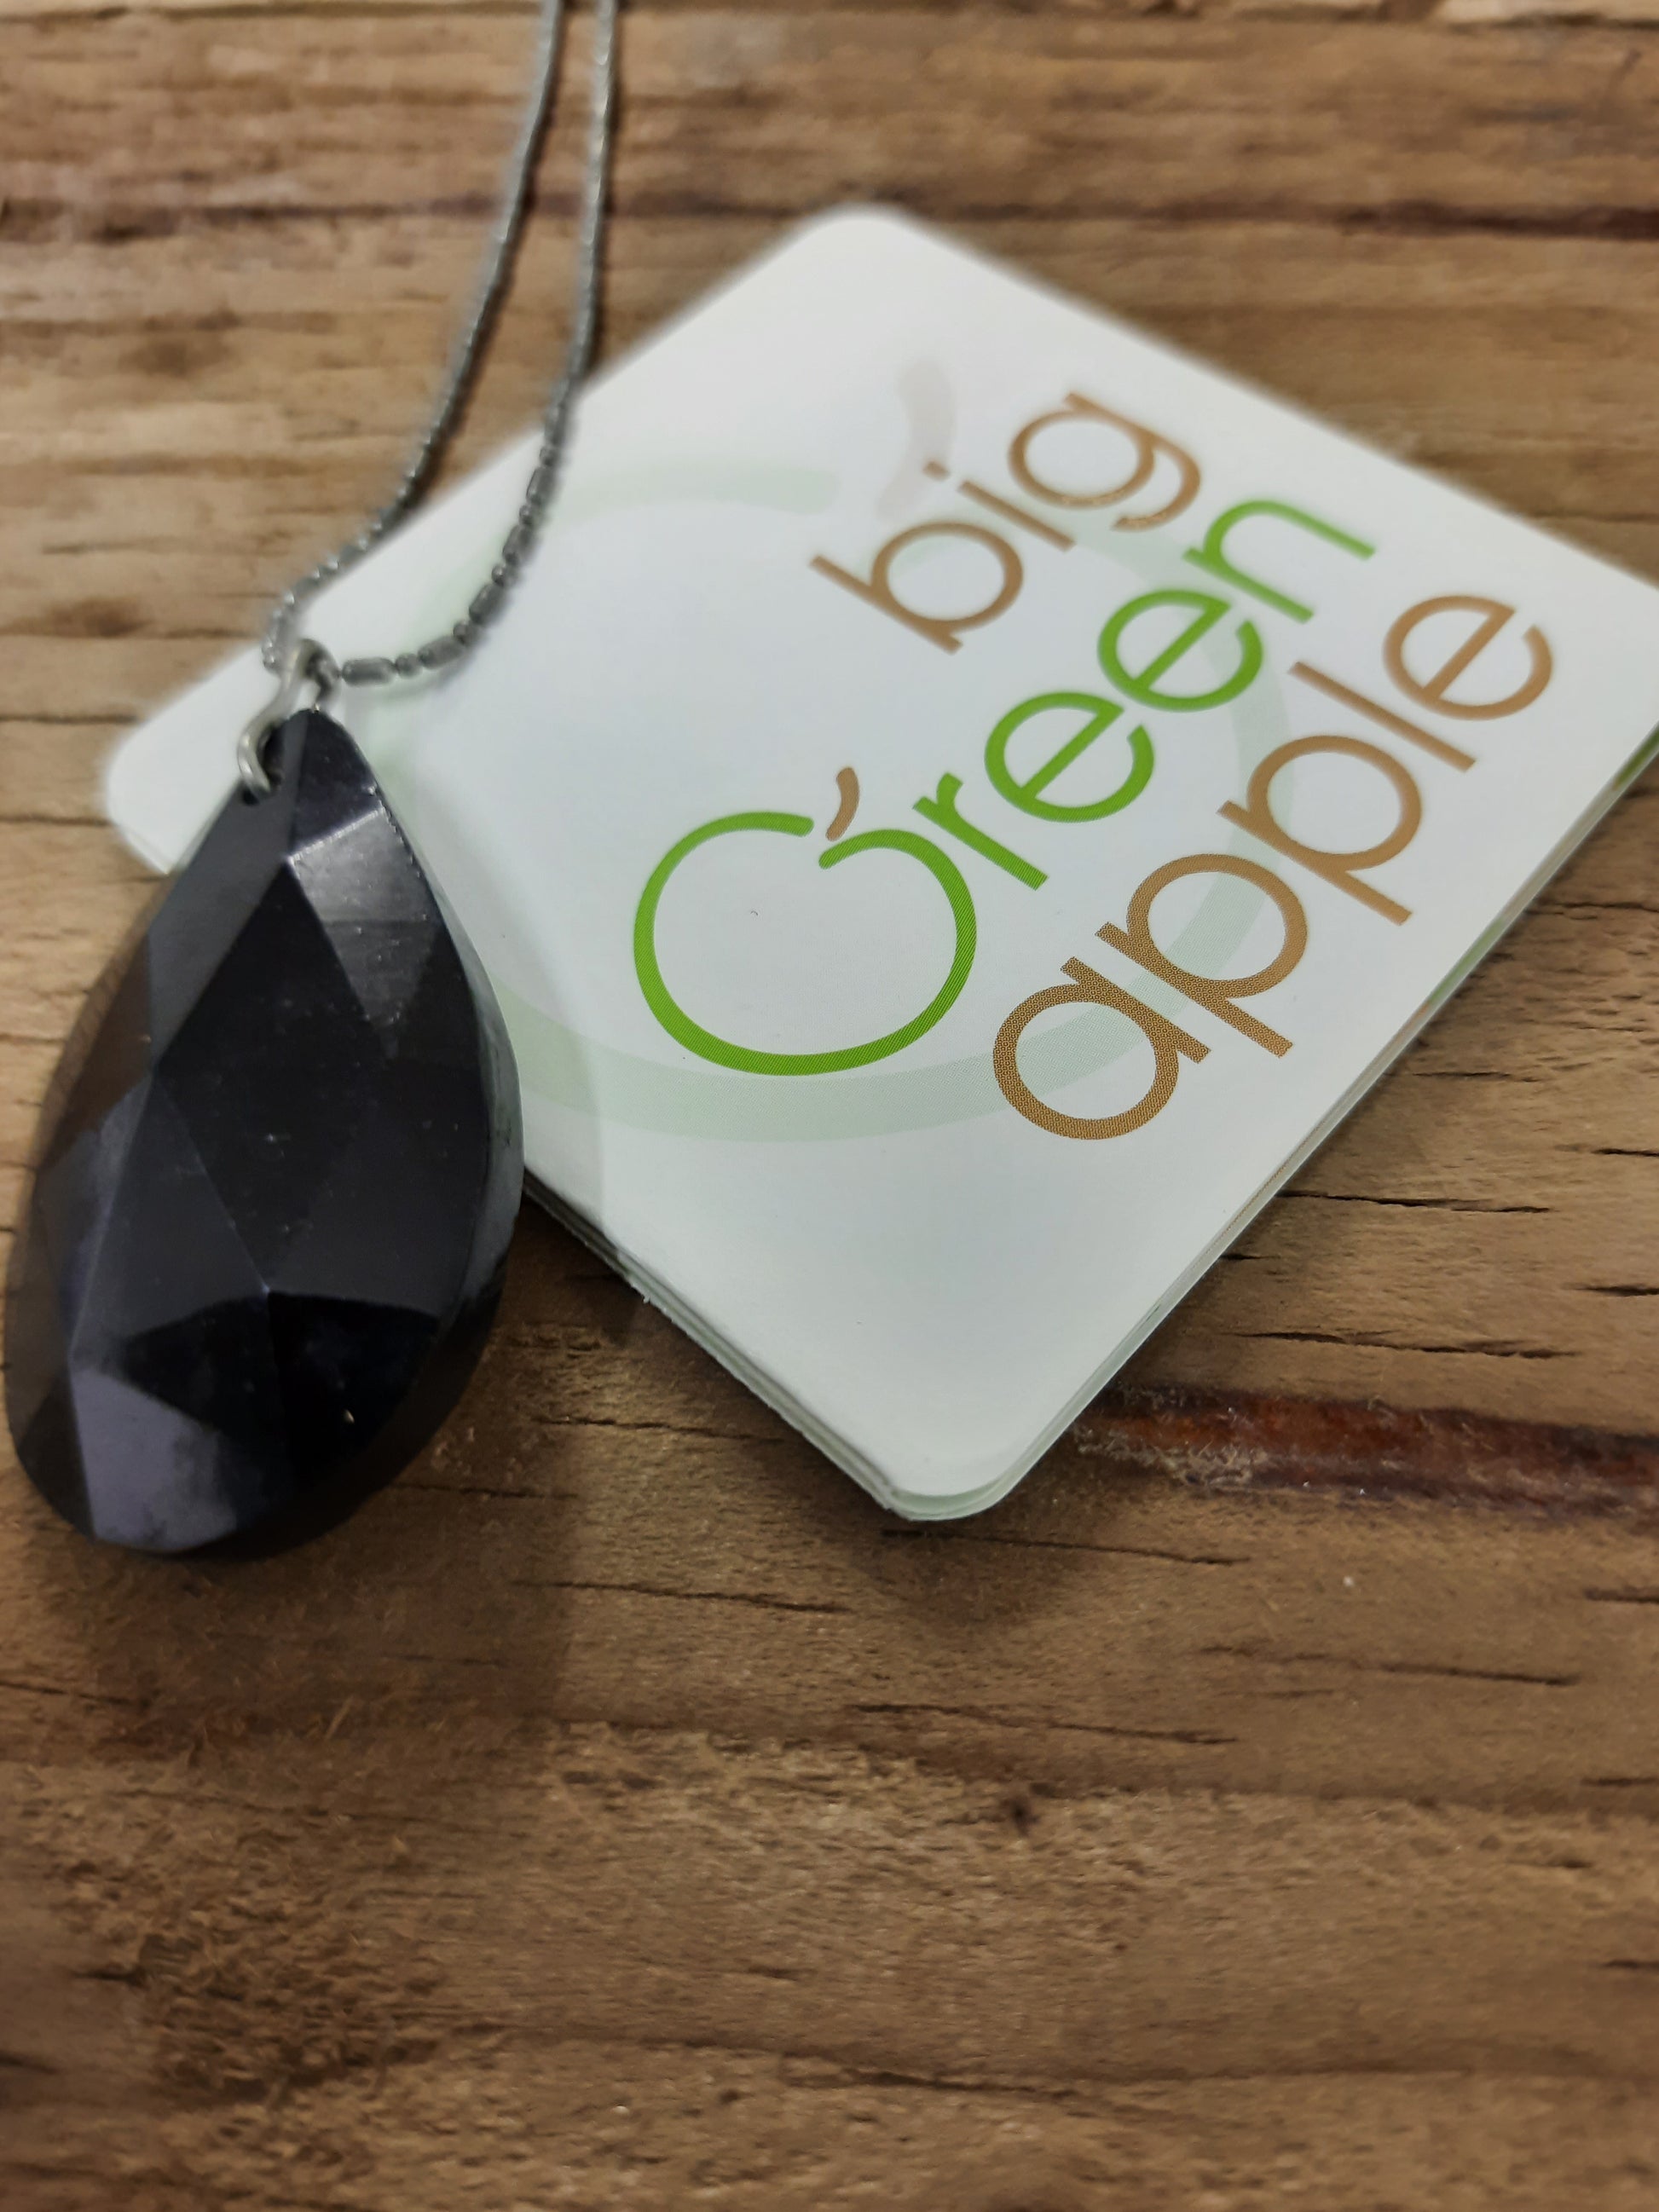 Necklaces, Mother's Day Gifts, Jewellery Fair, Sustainable Company, BIG GREEN APPLE 